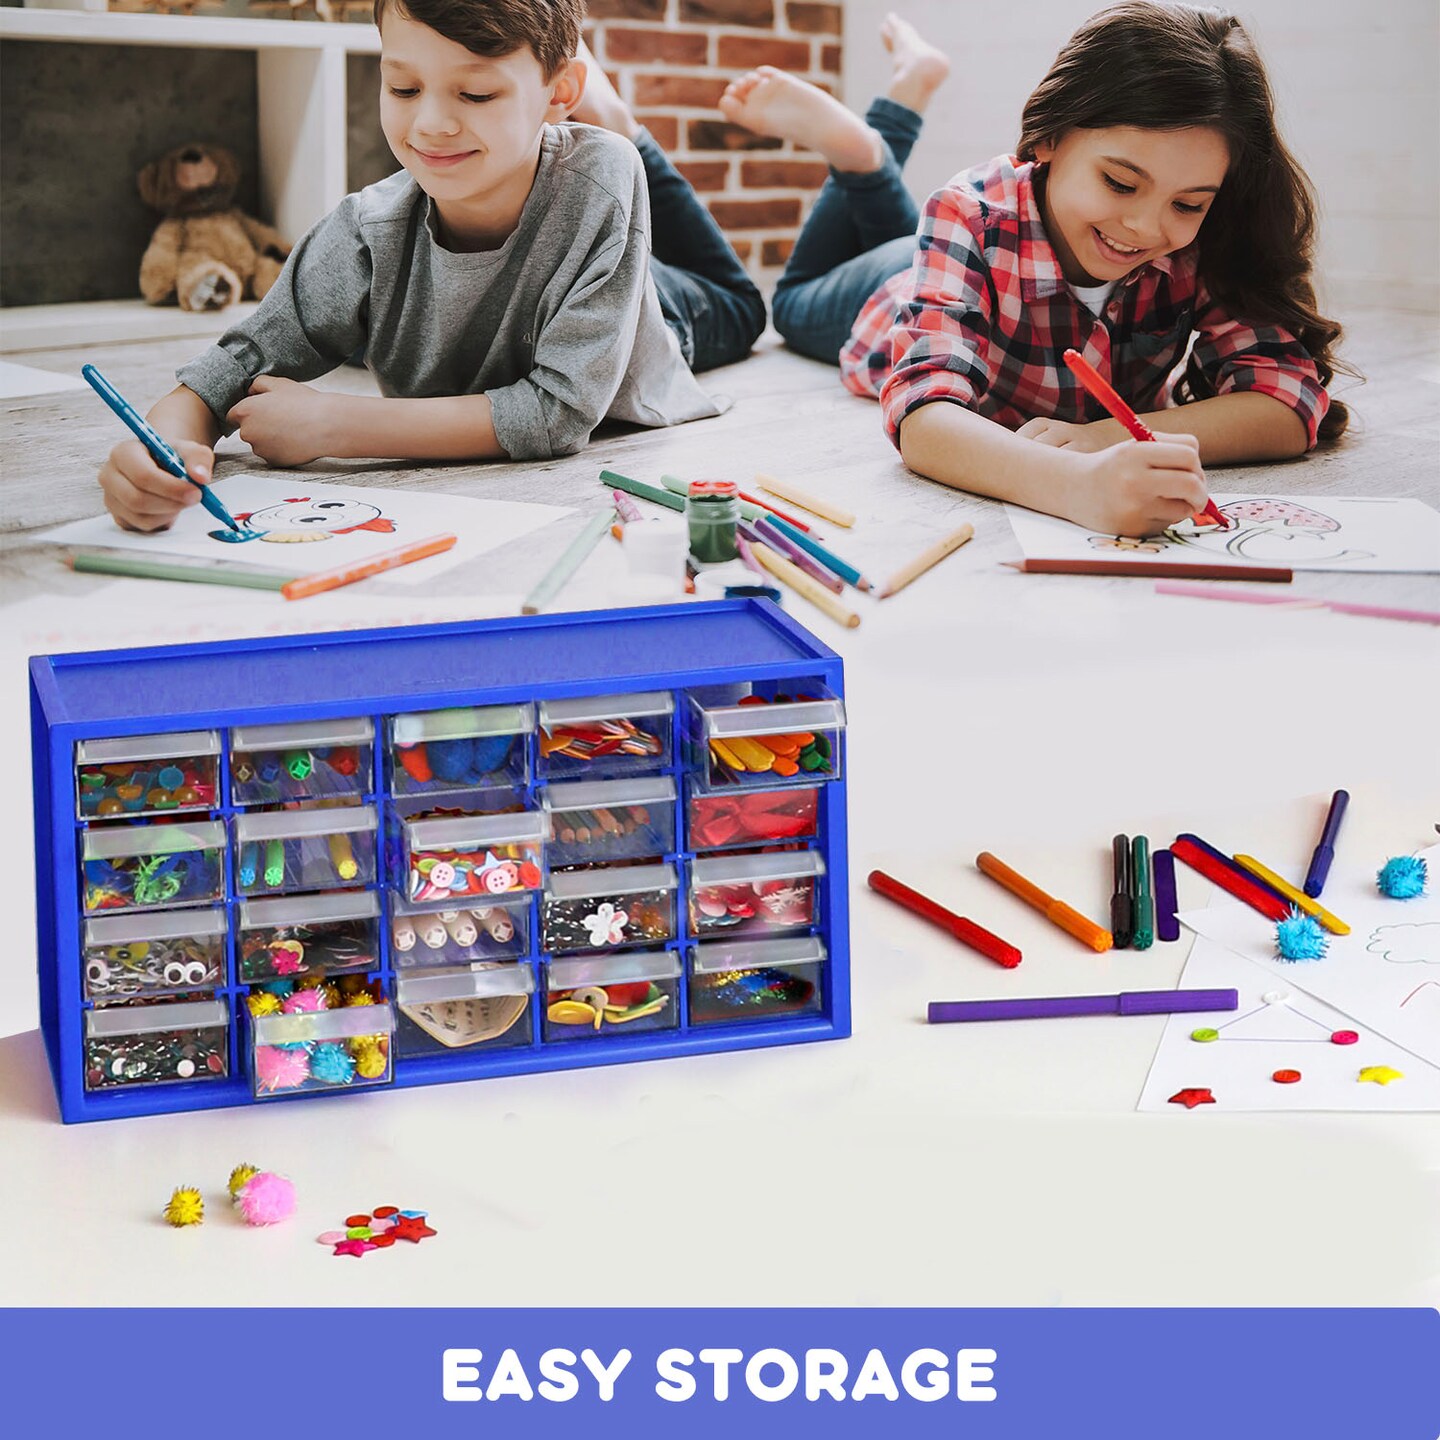 Arts & Crafts Supply Center Complete with 20 Filled Drawers of Craft M –  Toys 2 Discover